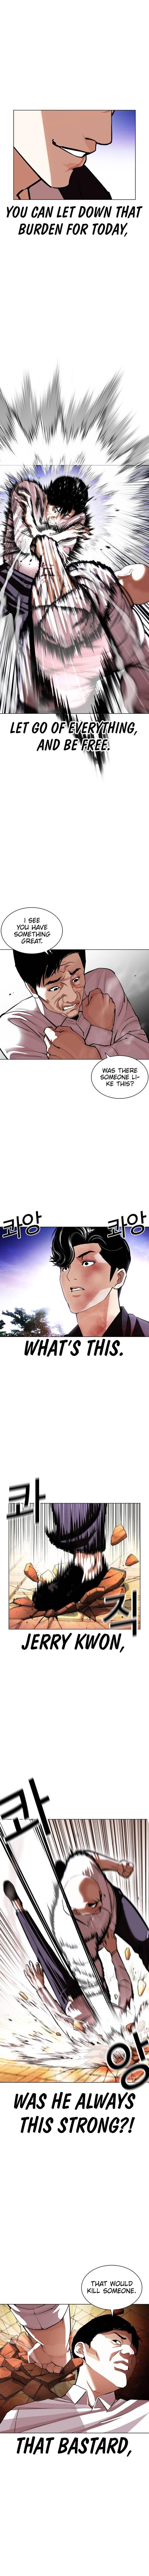 Lookism Chapter 401 page 9 - MangaWeebs.in